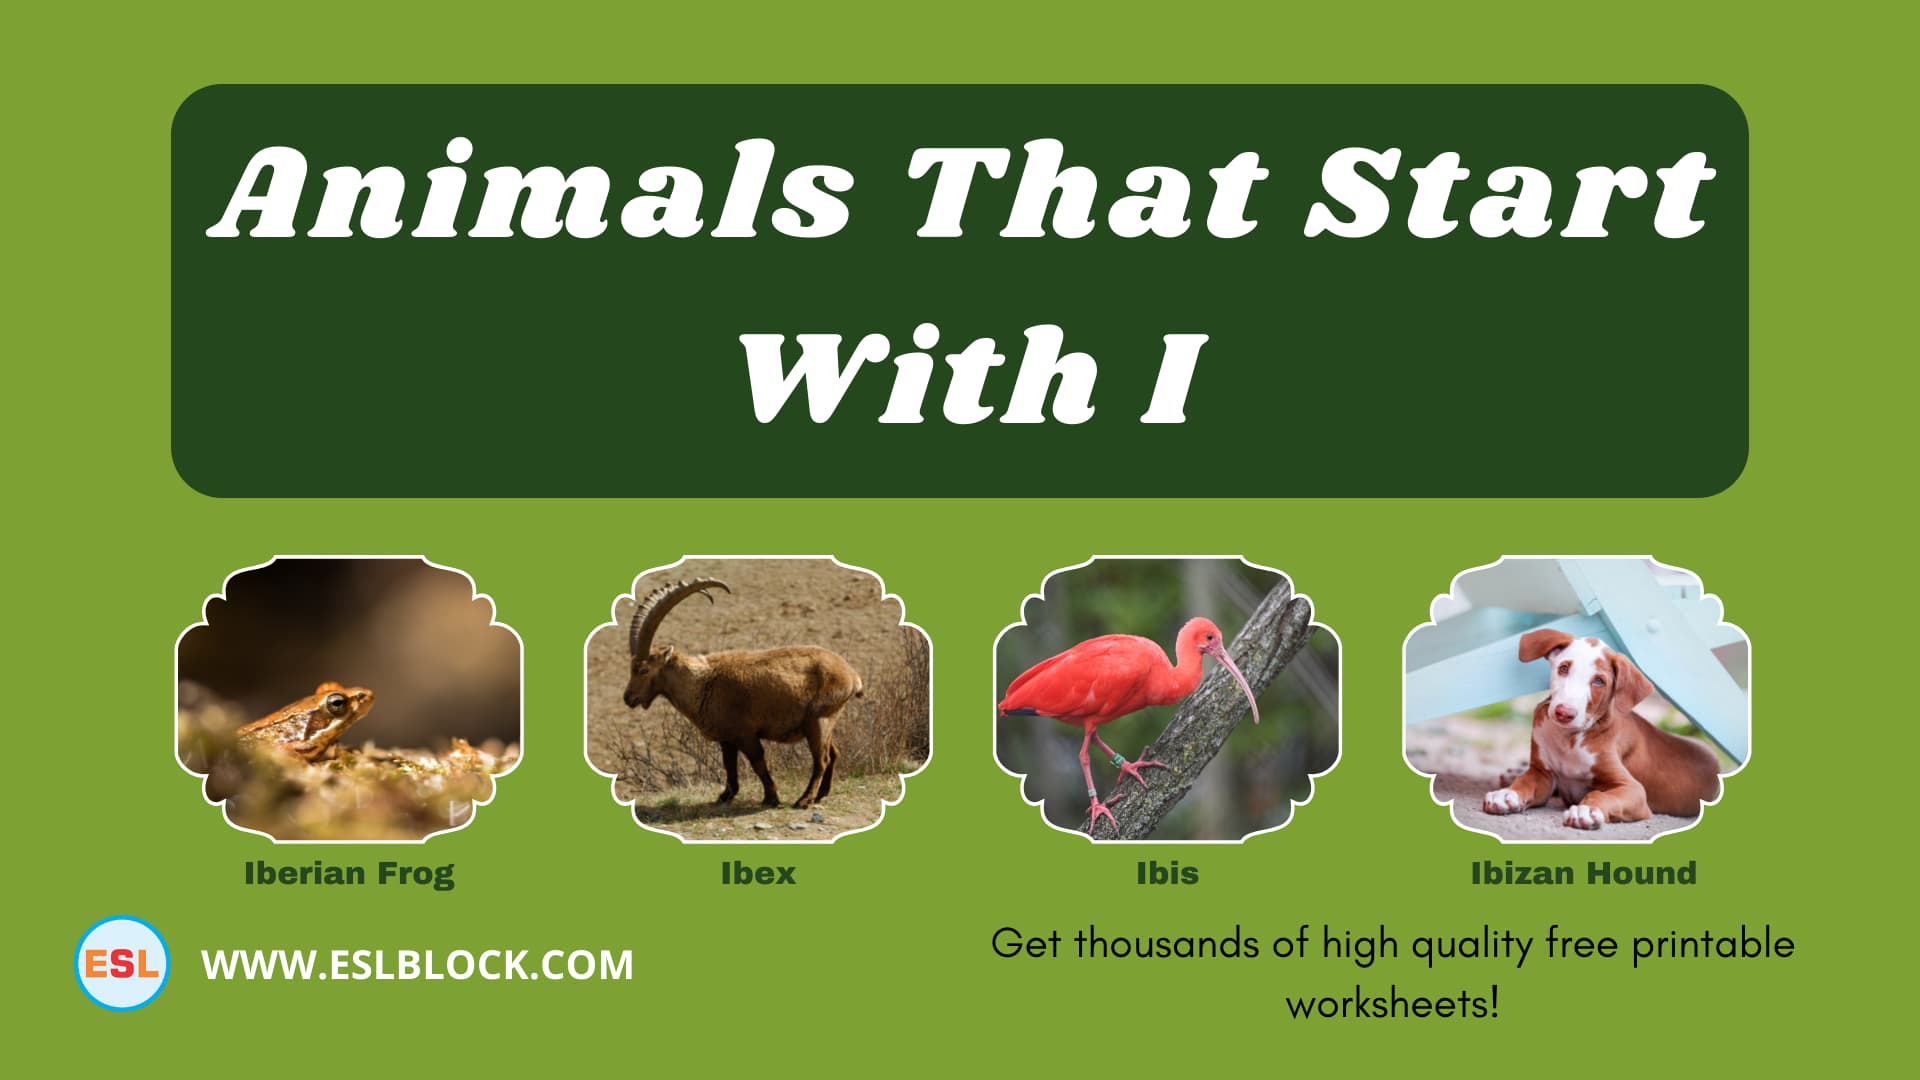 5 Letter Animals Starting With I, Animals List, Animals Names, Animals That Begins With I, Animals That Start With I, English, English Nouns, English Vocabulary, English Words, I Animals, I Animals in English, I Animals Names, List of Animals That Start With I, Nouns, Vocabulary